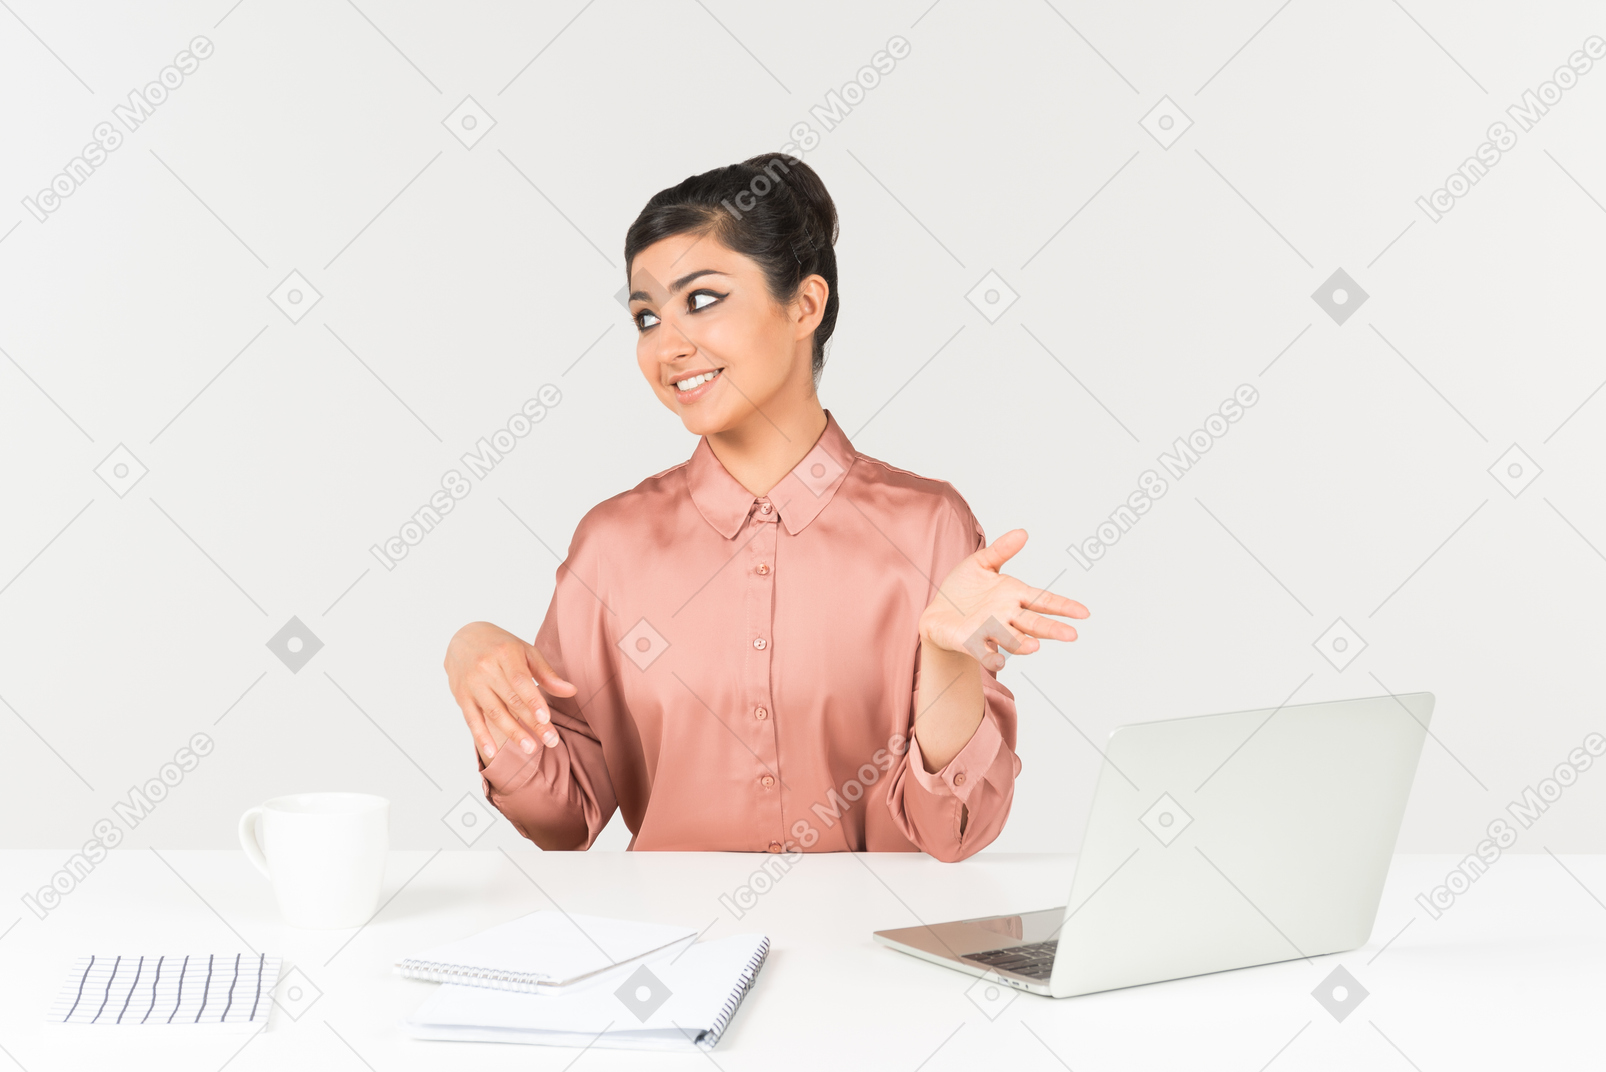 Young indian woman sitting at the office desk and pointing with both hands